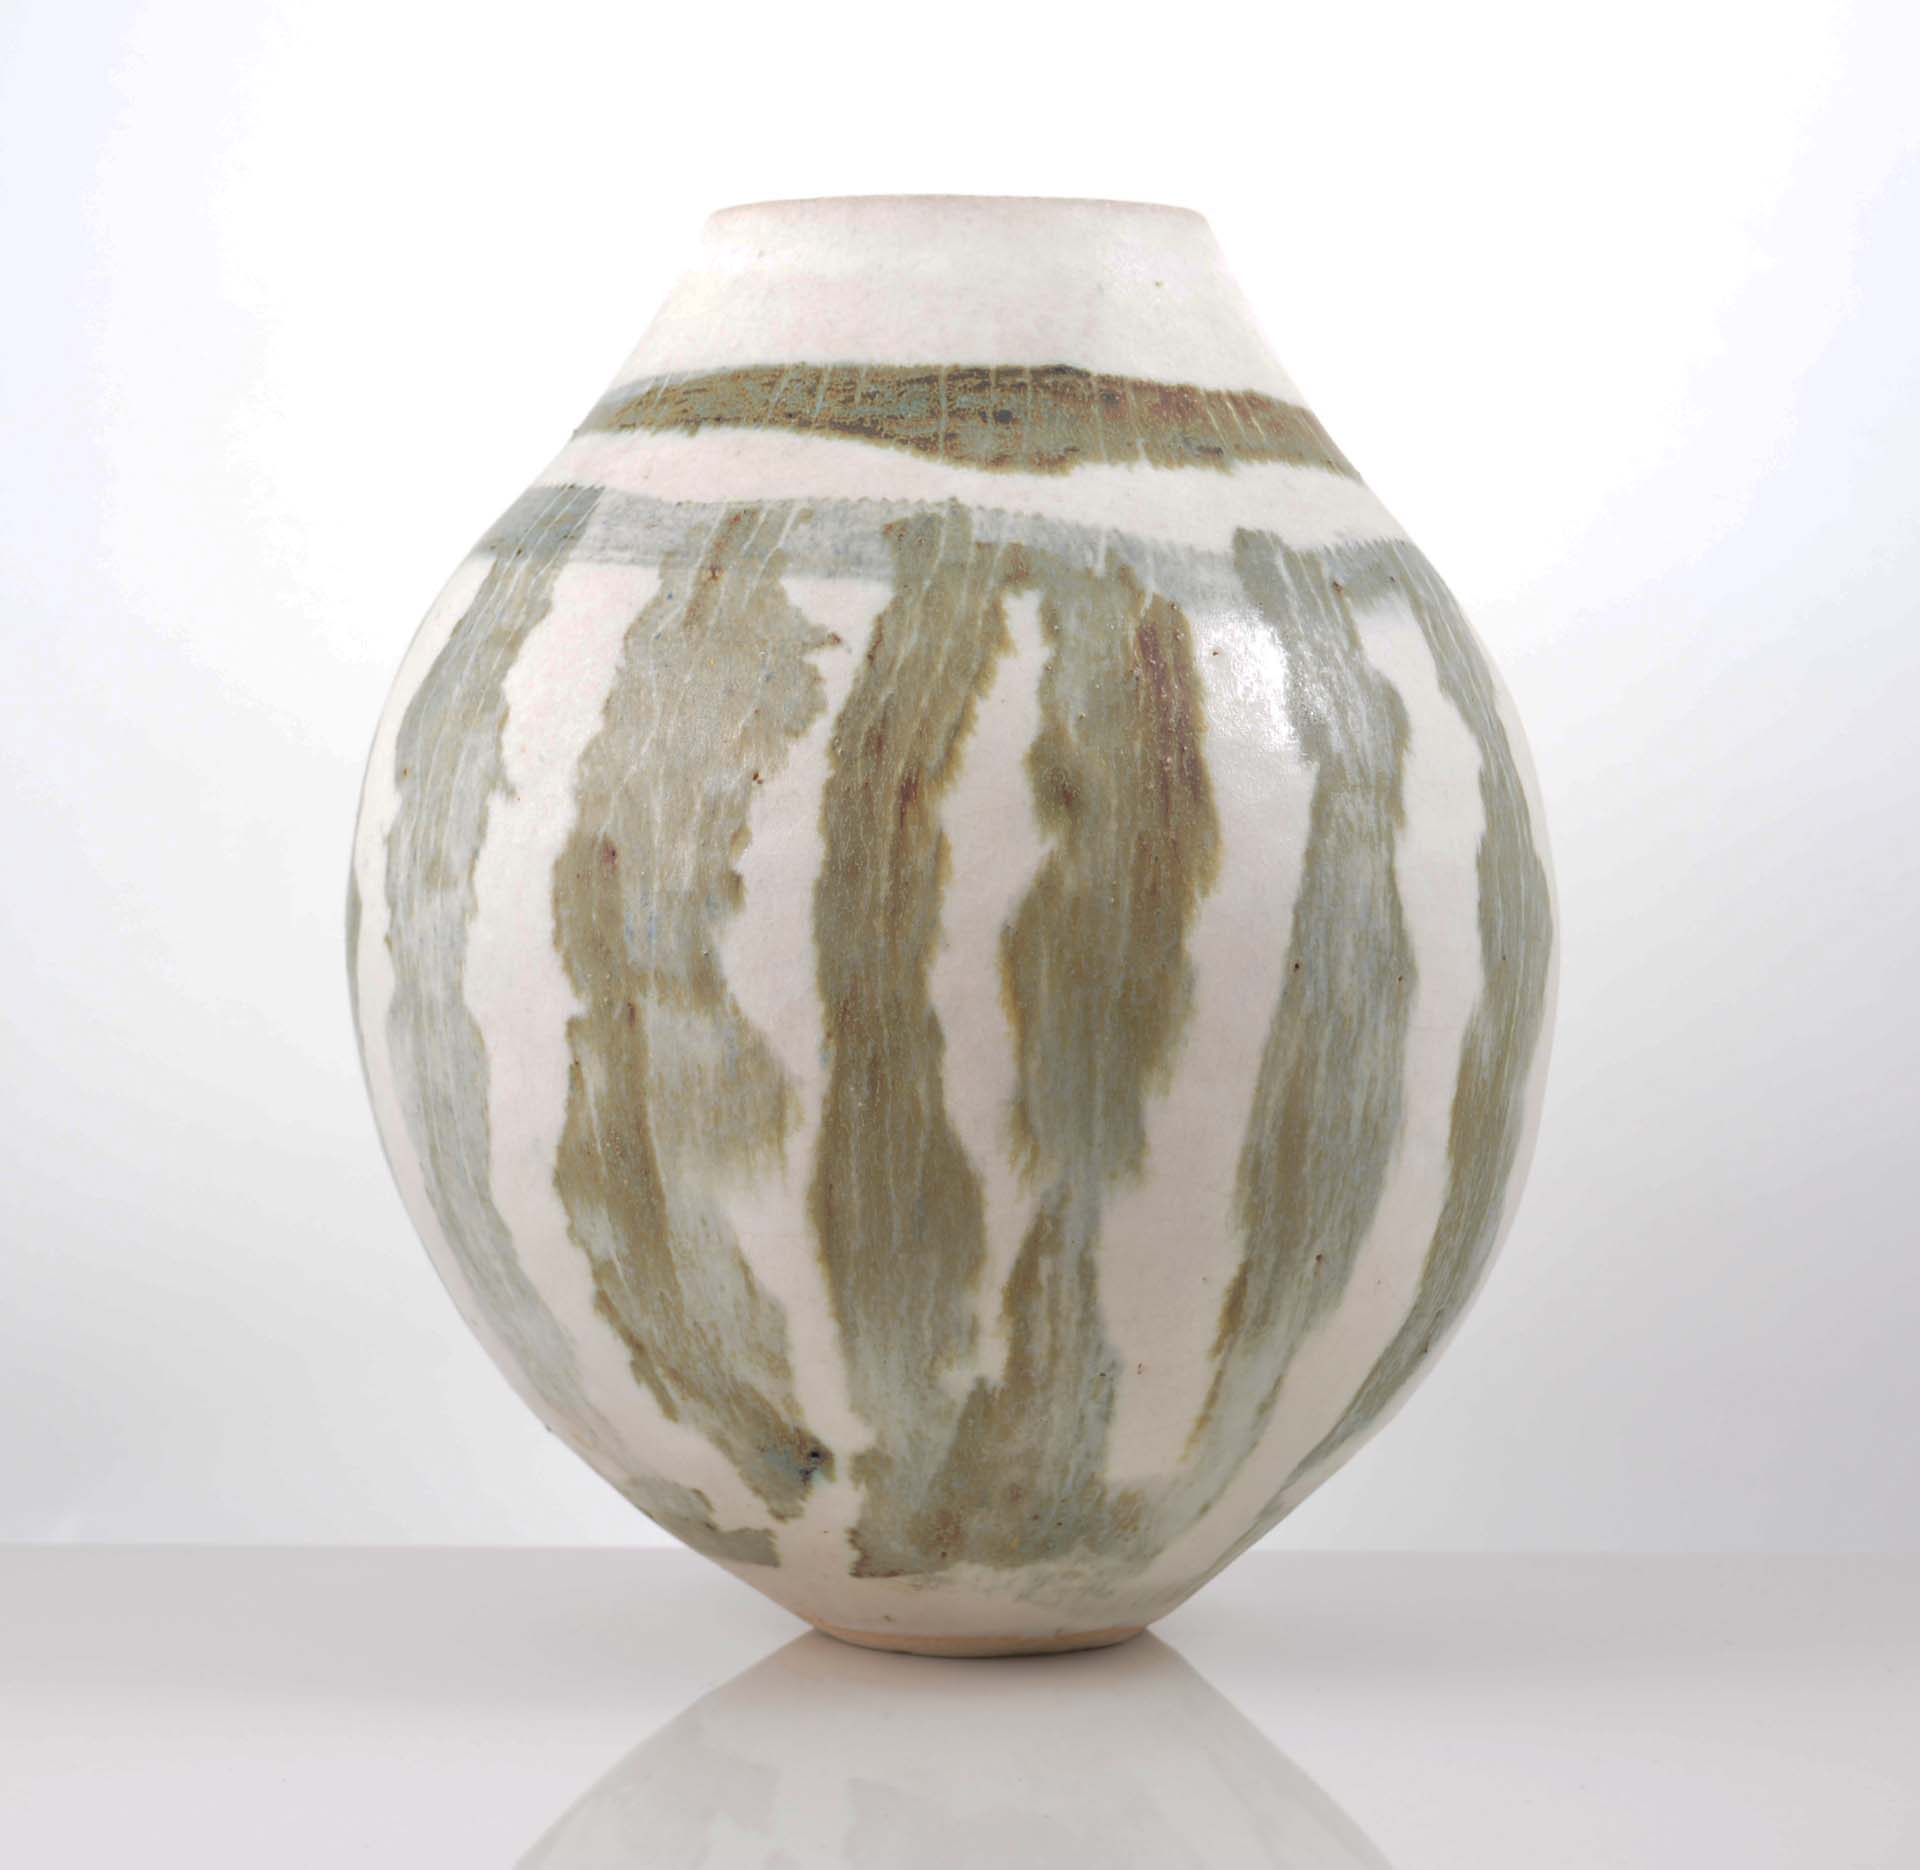 Studio pottery ovoid vase, white bodied with banding and striations, 27cm.